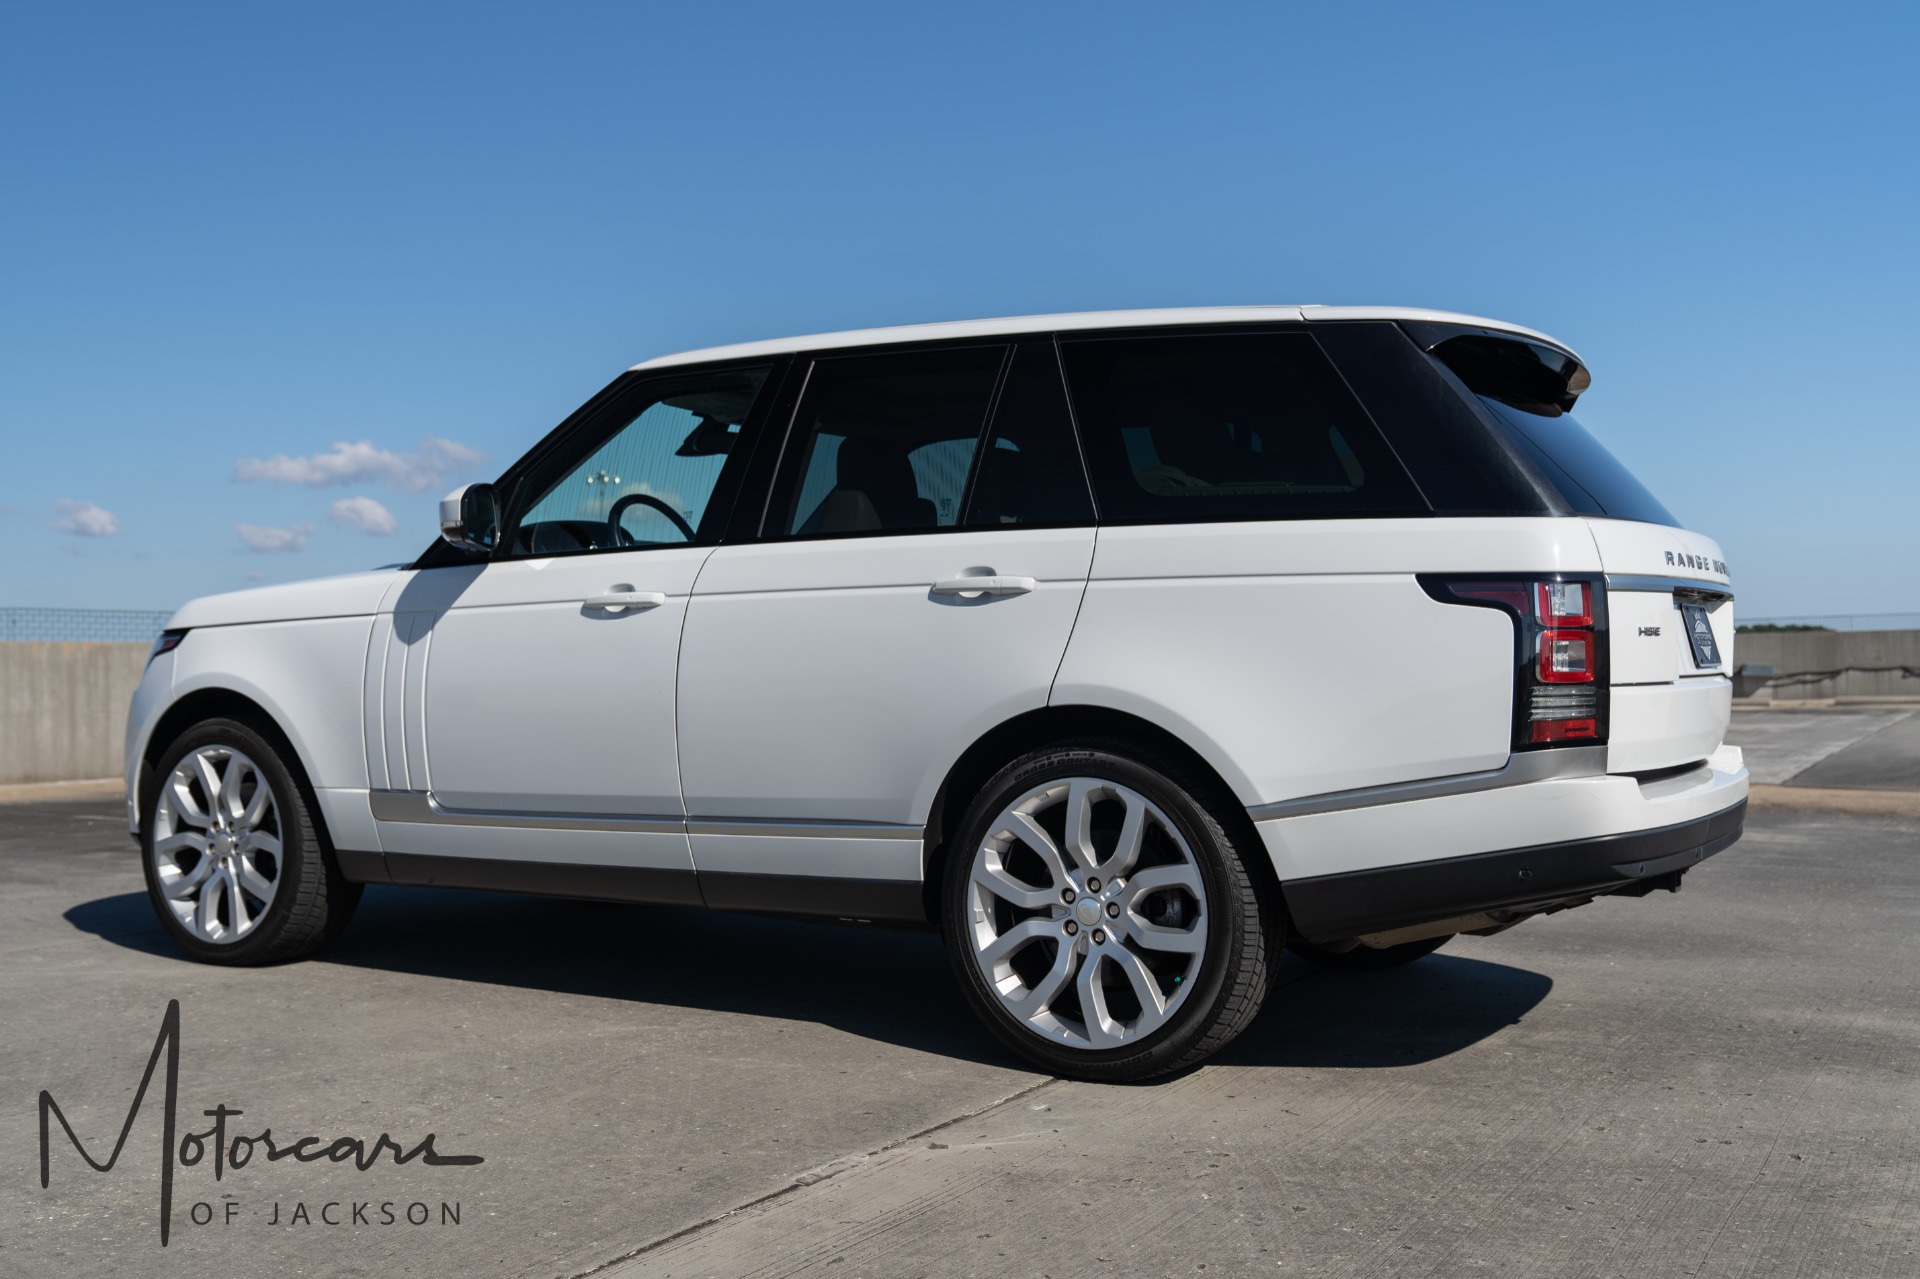 Used-2015-Land-Rover-Range-Rover-HSE-for-sale-Jackson-MS